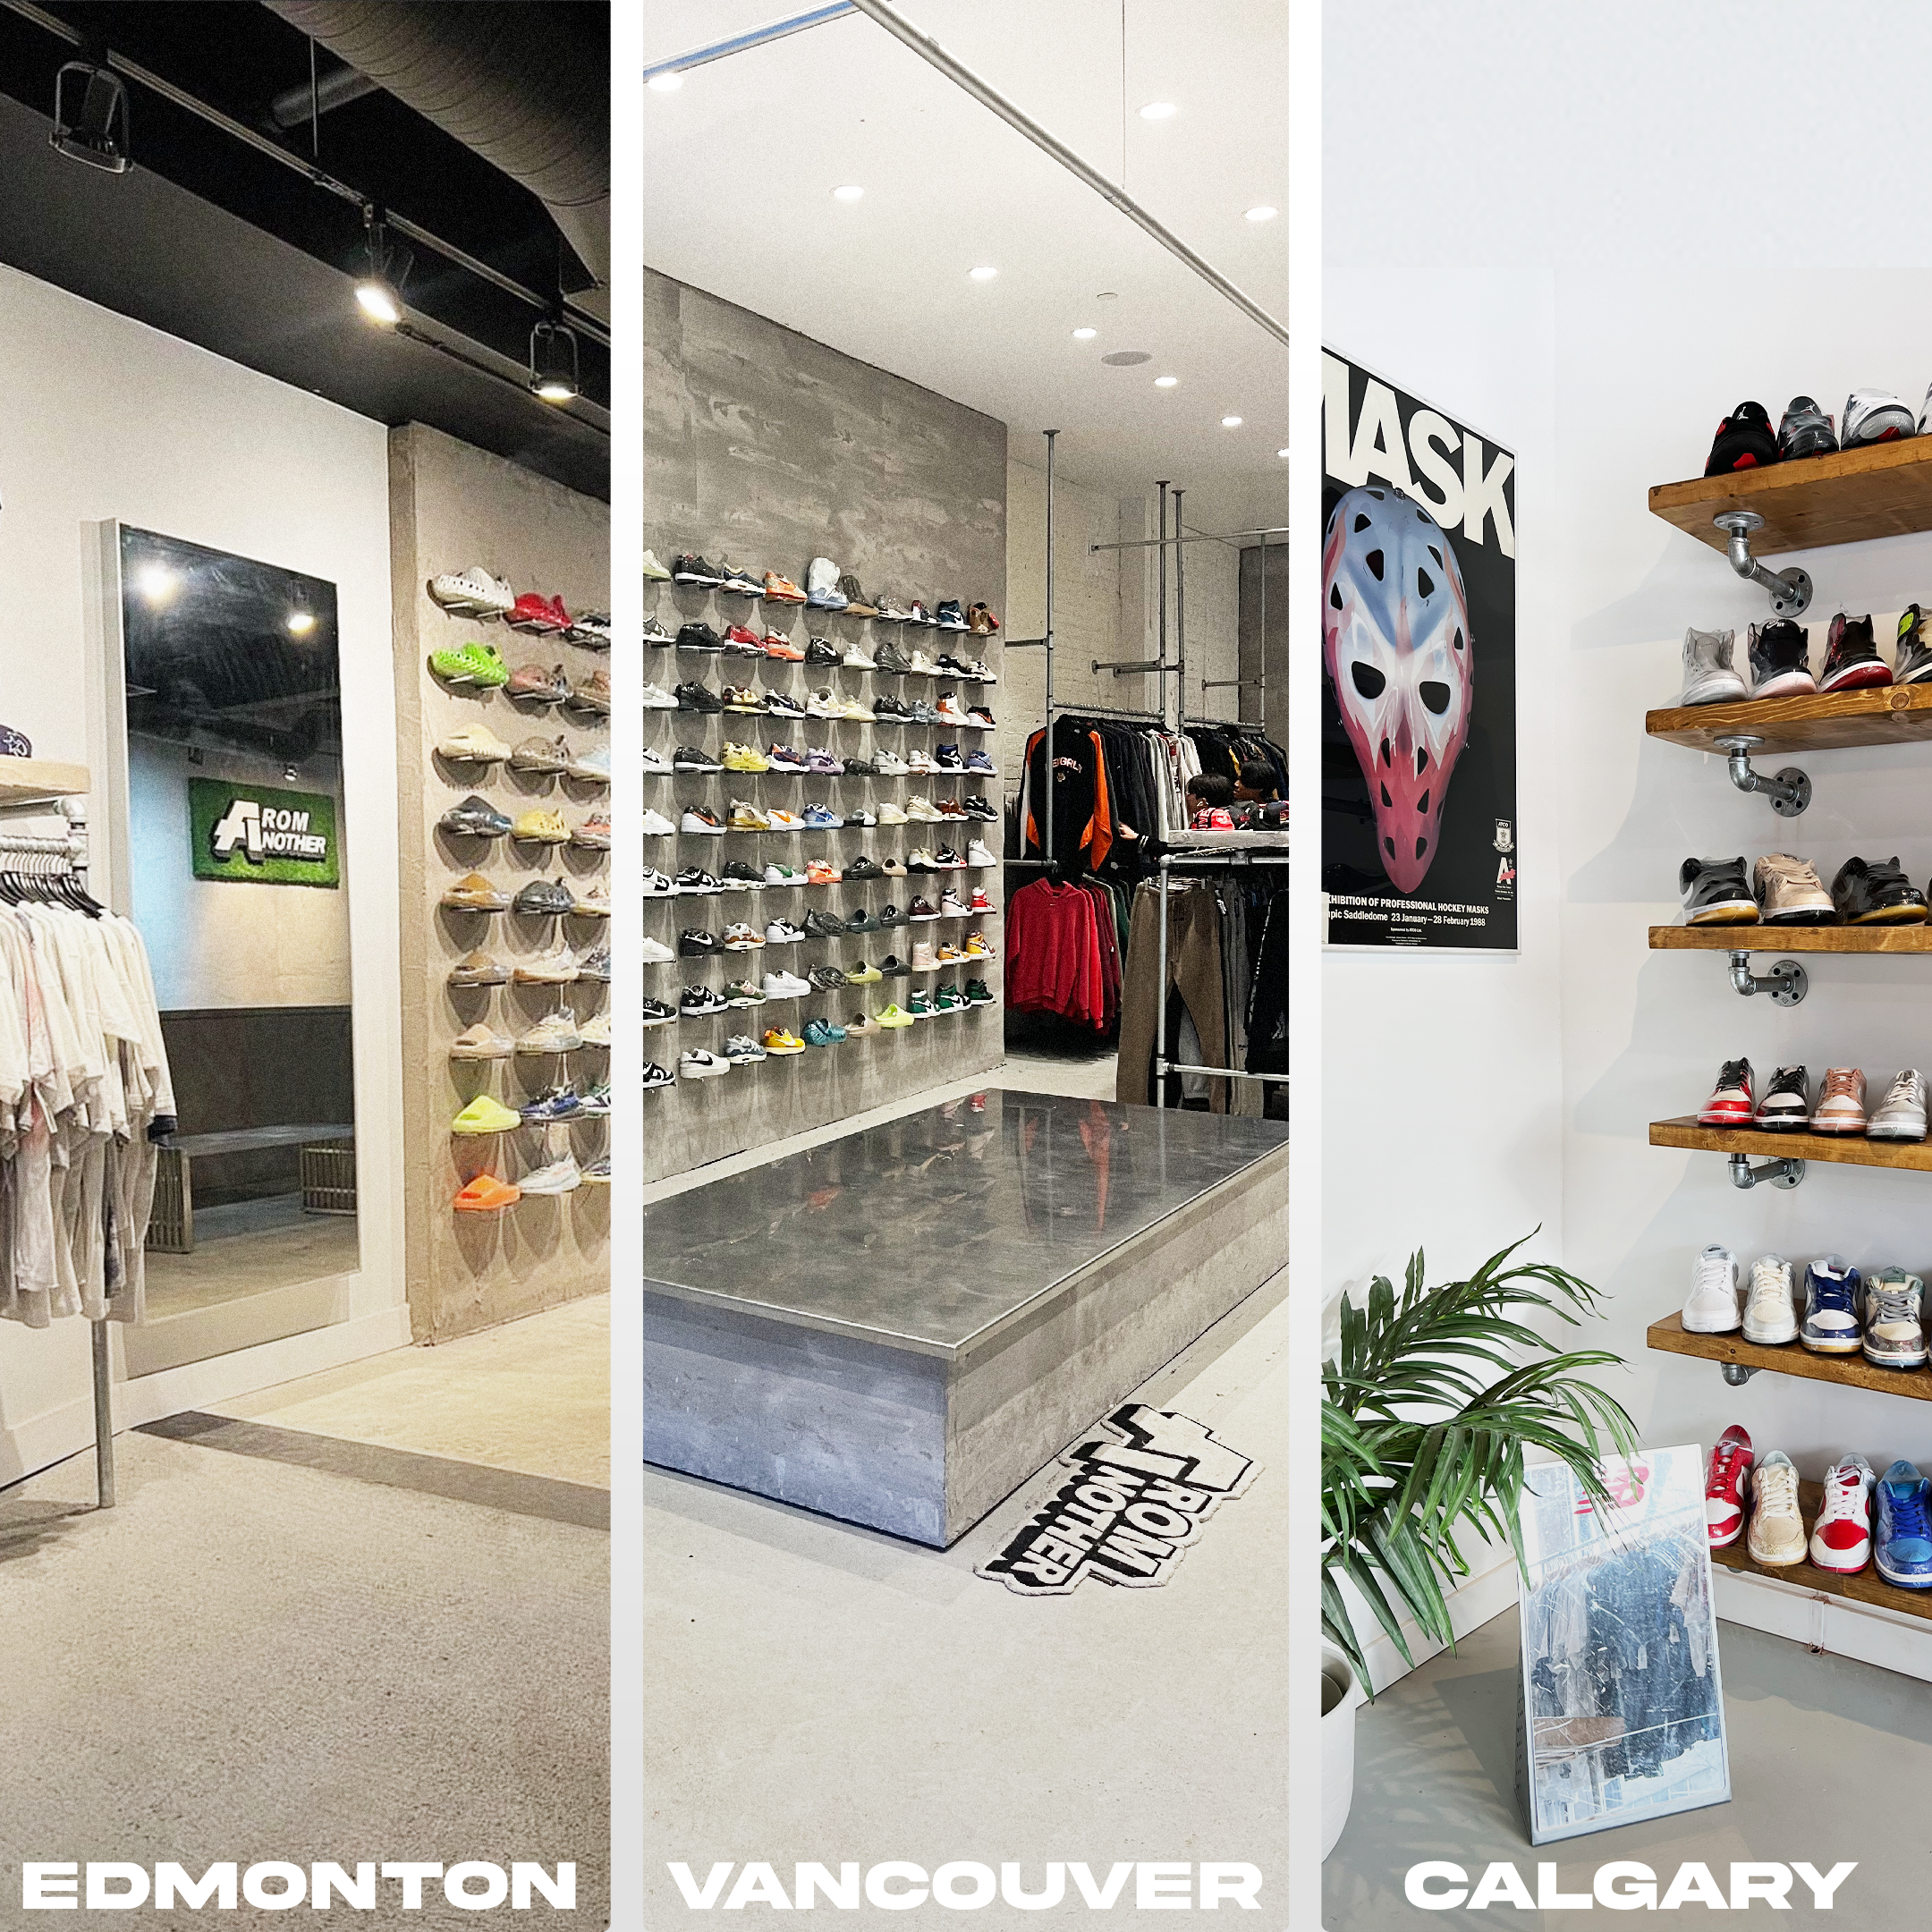 a banner image show the edmonton, vancouver and calgary from another stores